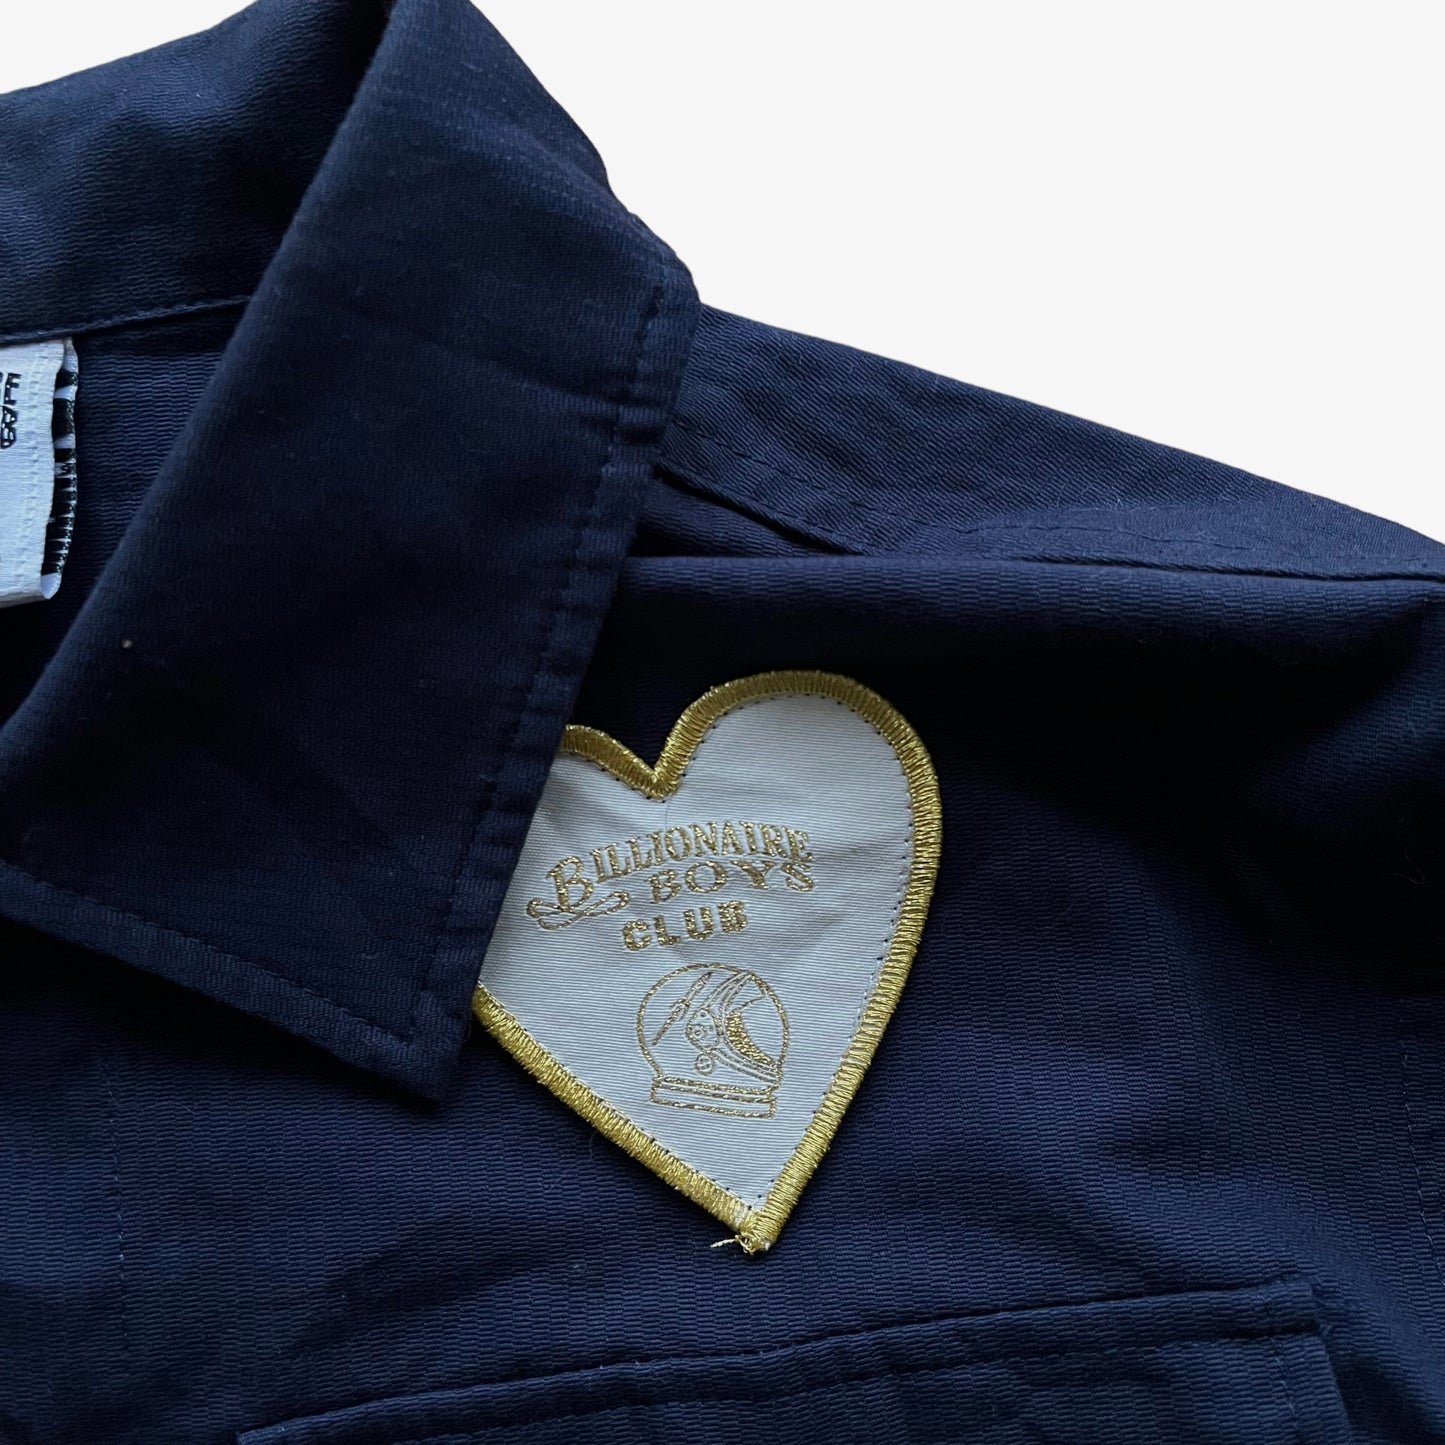 Vintage Y2K Billionaire Boys Club Chore Shirt With A Back Embroidered Pin Up Patch - Casspios Dream